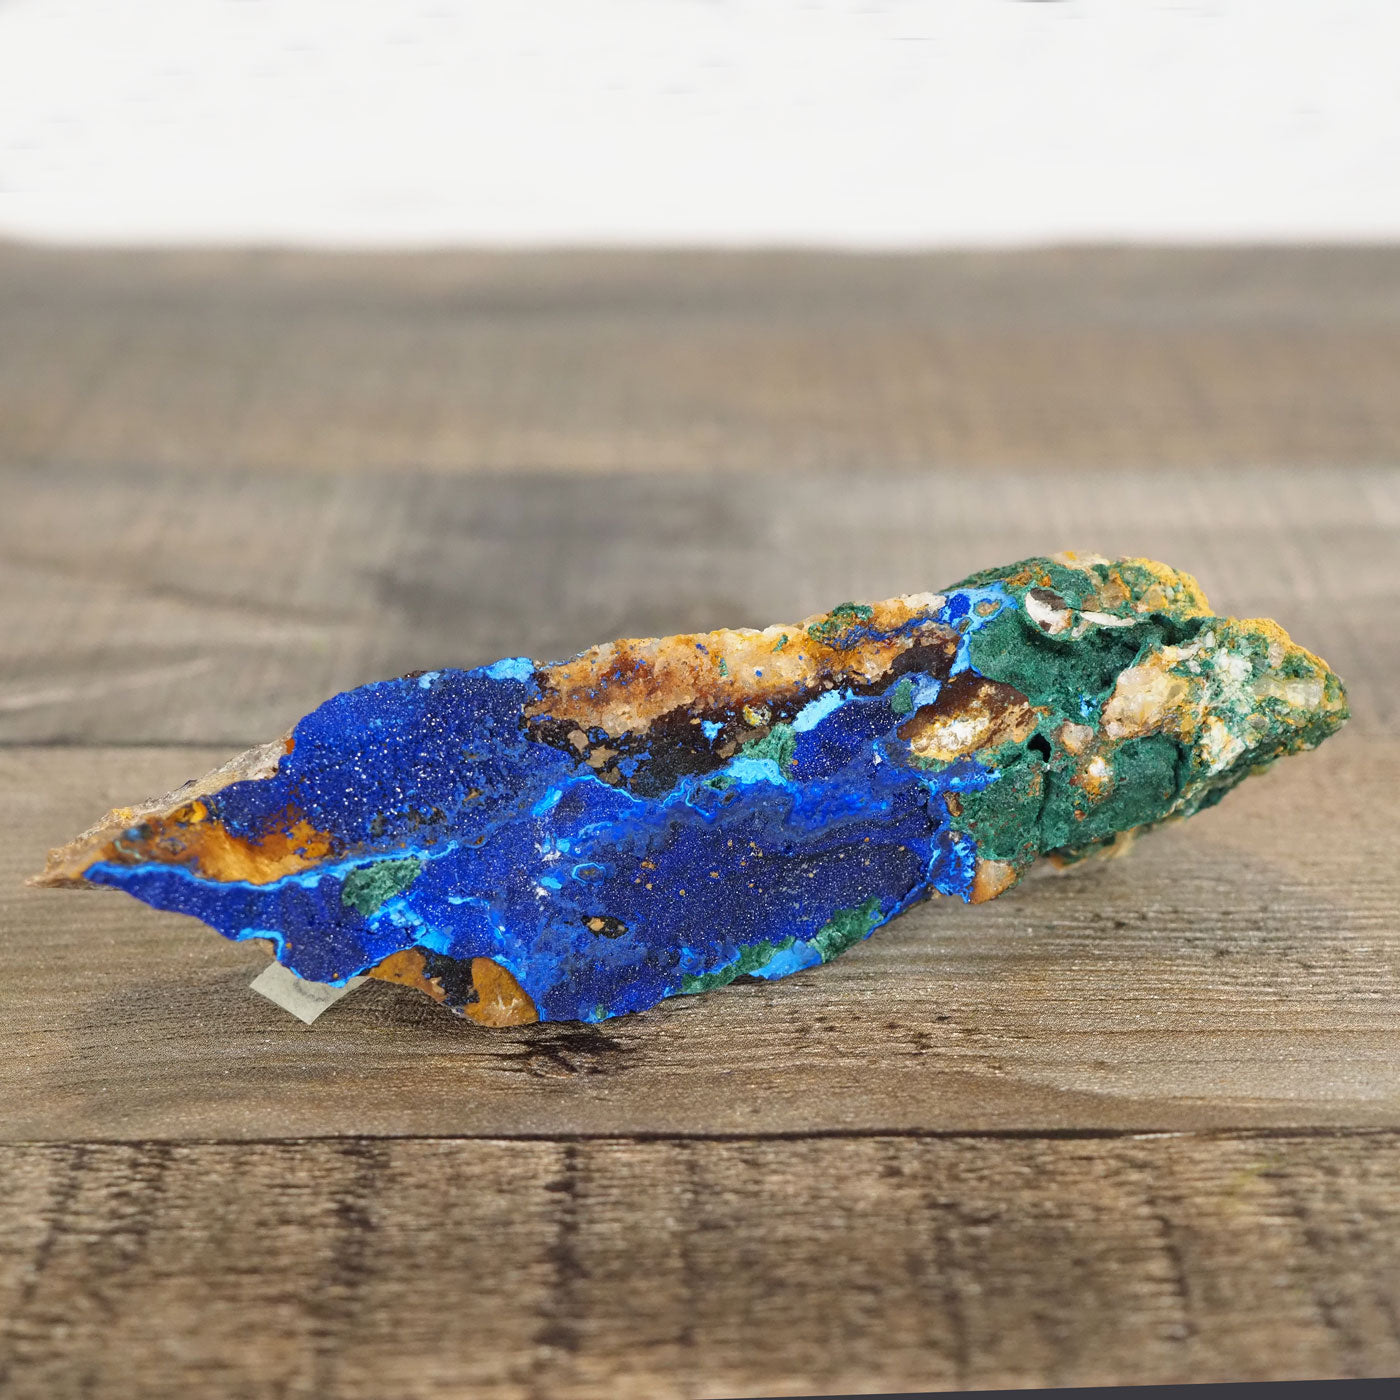 4.3" long Sparkly Azurite with Fibrous Malachite